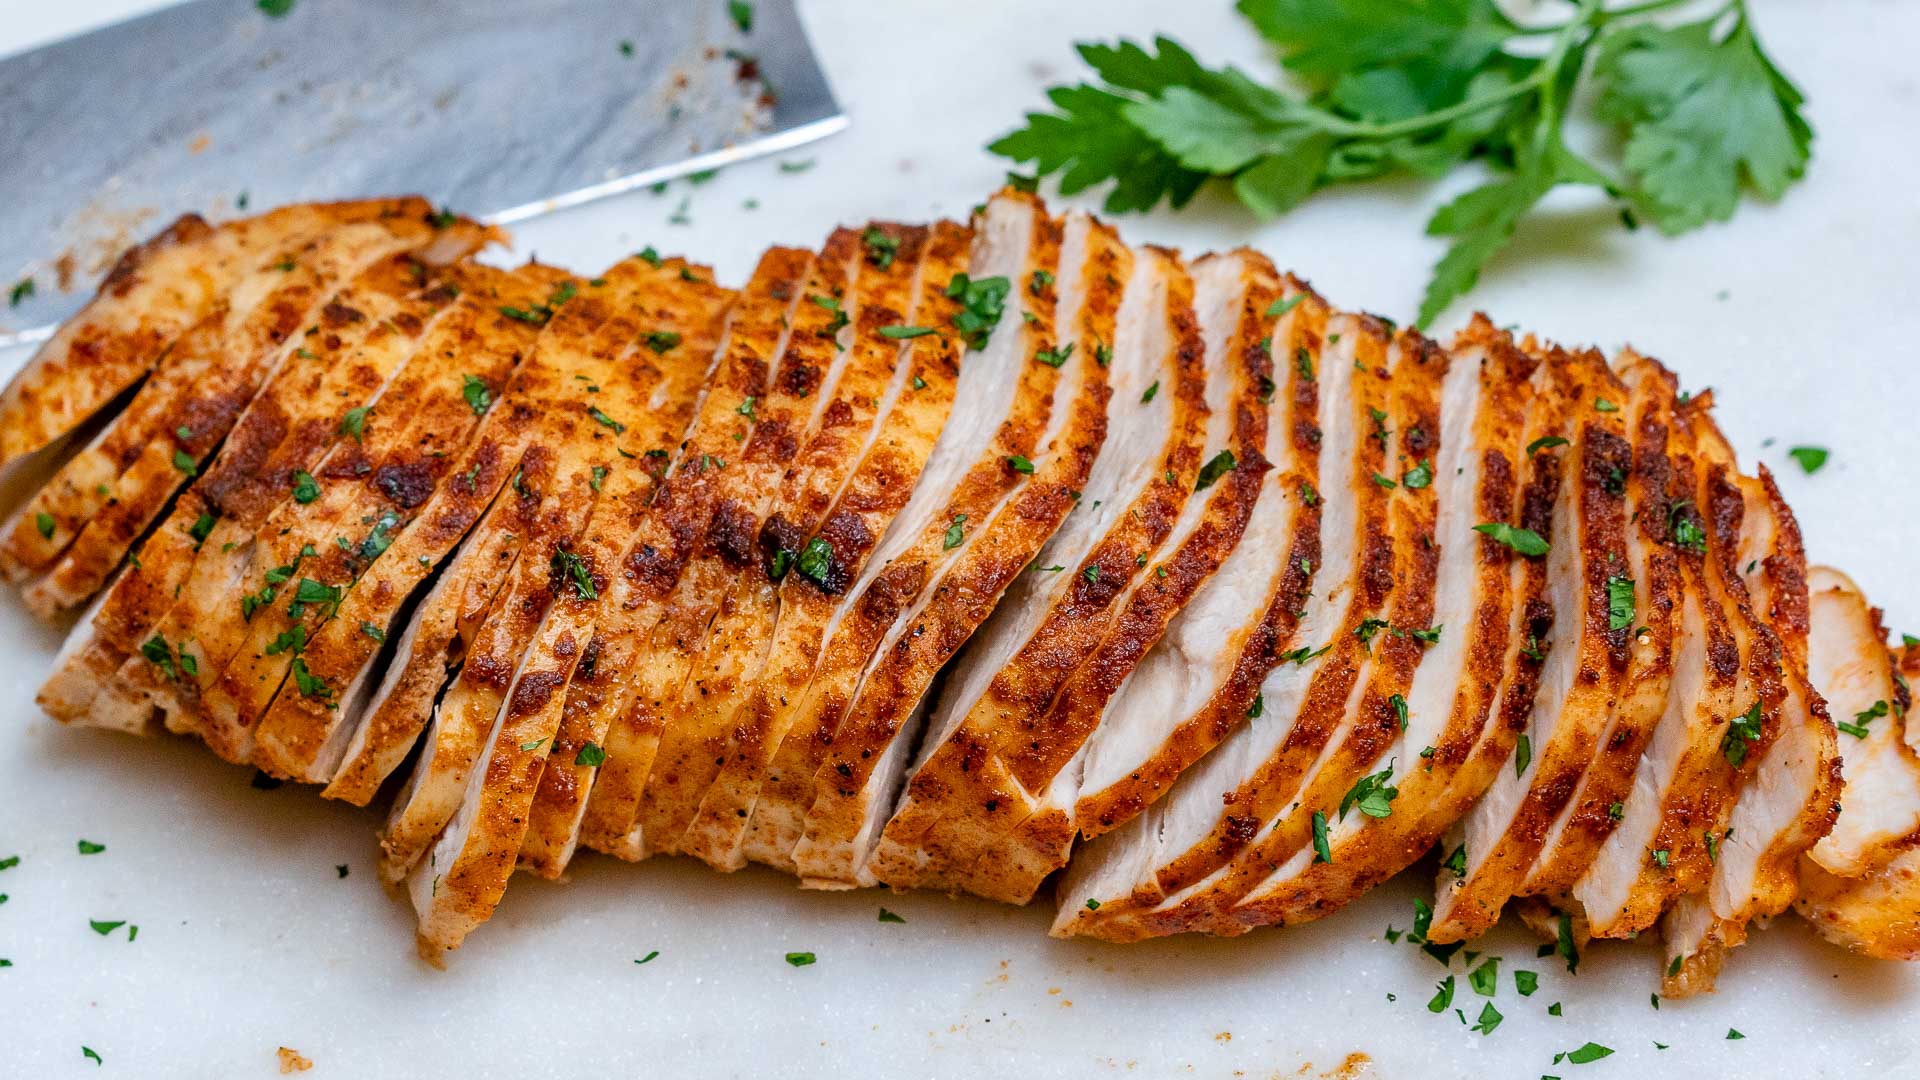 How to Make Perfect Juicy Baked Chicken Breasts Everytime! | Clean Food  Crush